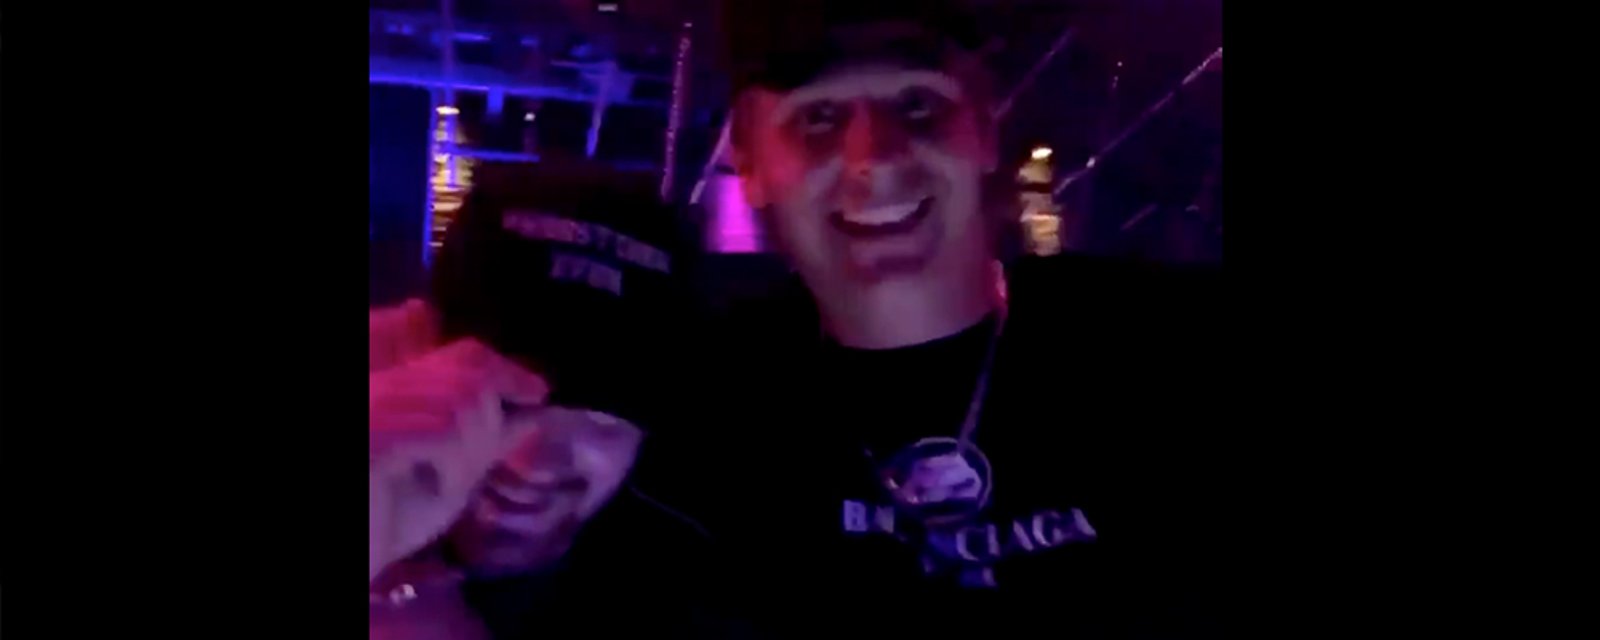 Jake Virtanen sets off controversy after posting videos of himself in Vancouver nightclub